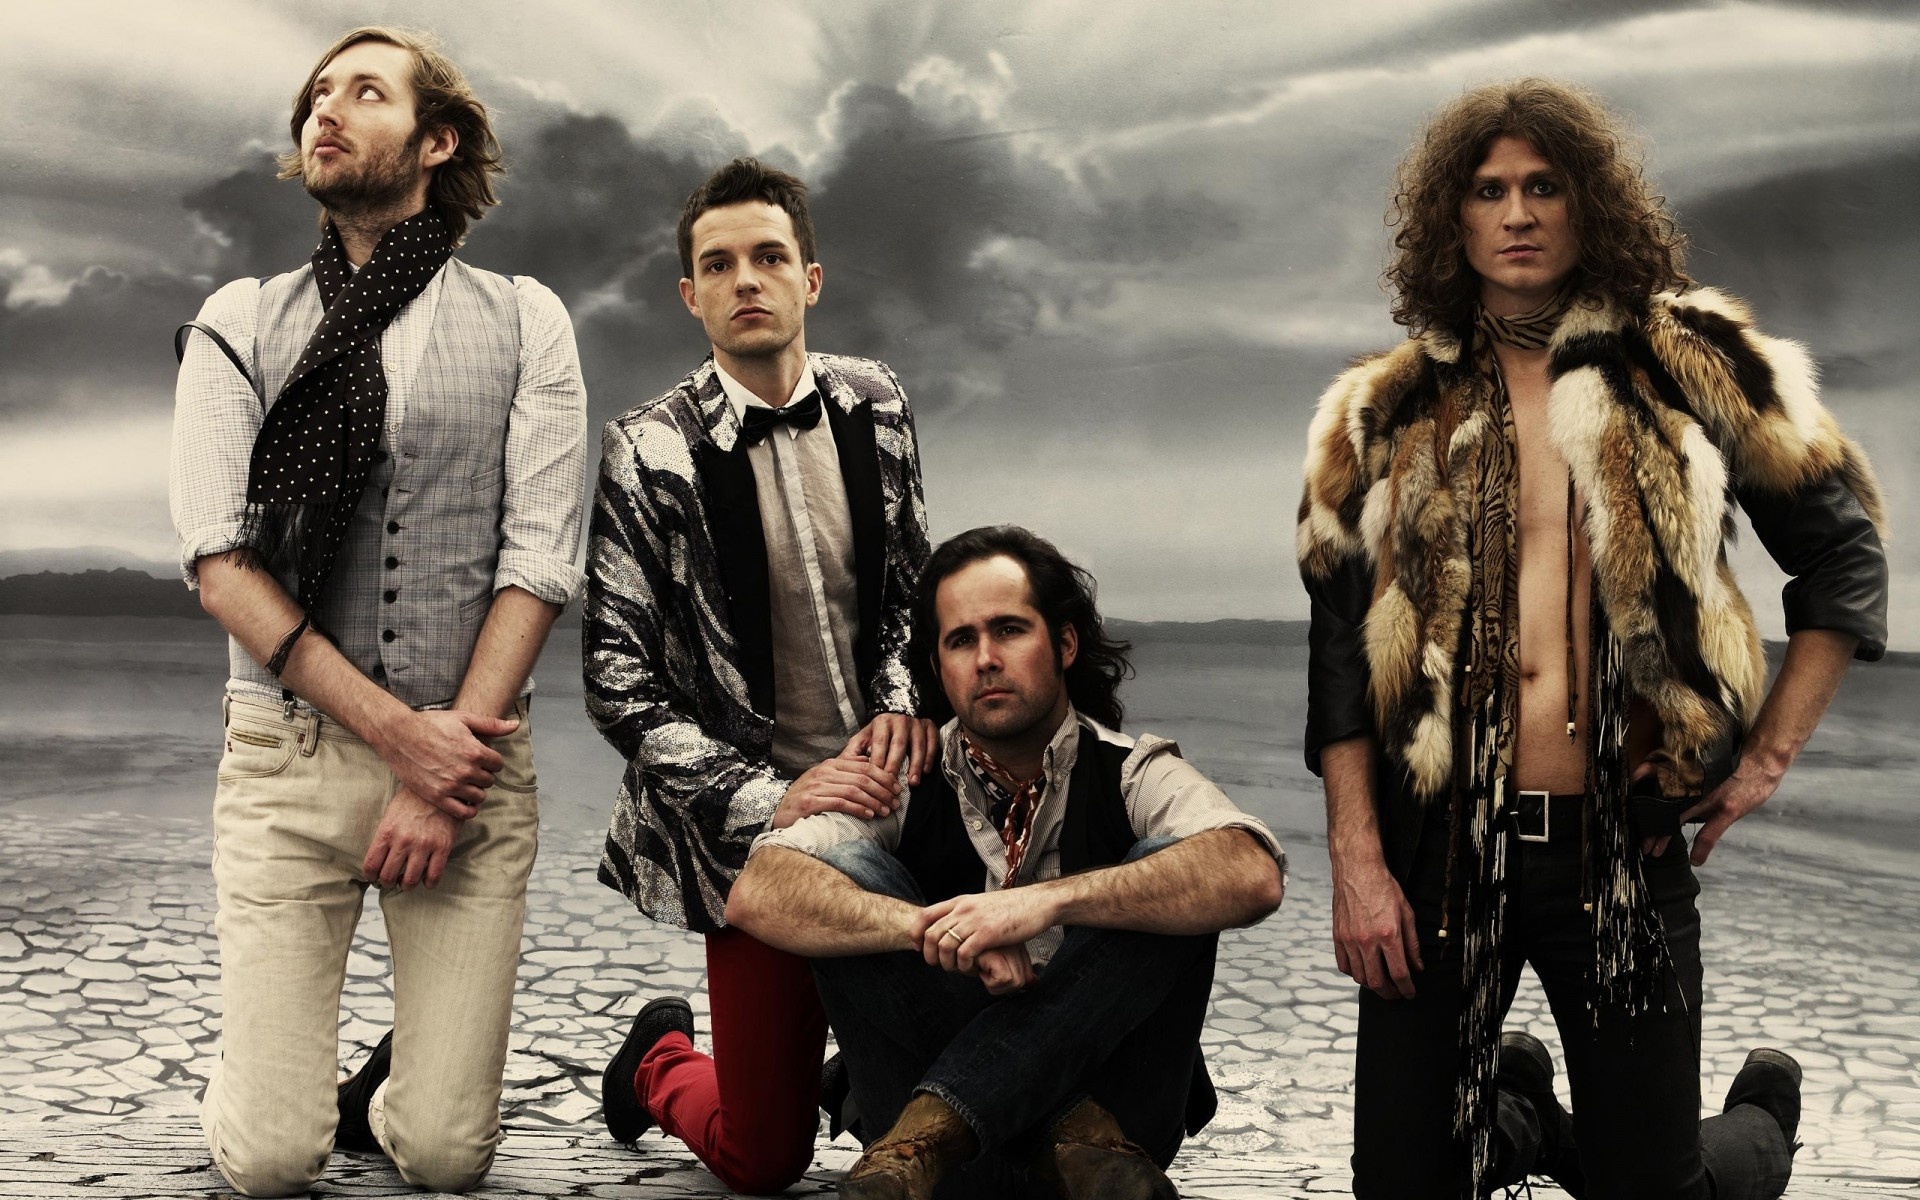 The Killers band, Monumental concerts, Fervent crowds, Music enthusiasts, 1920x1200 HD Desktop